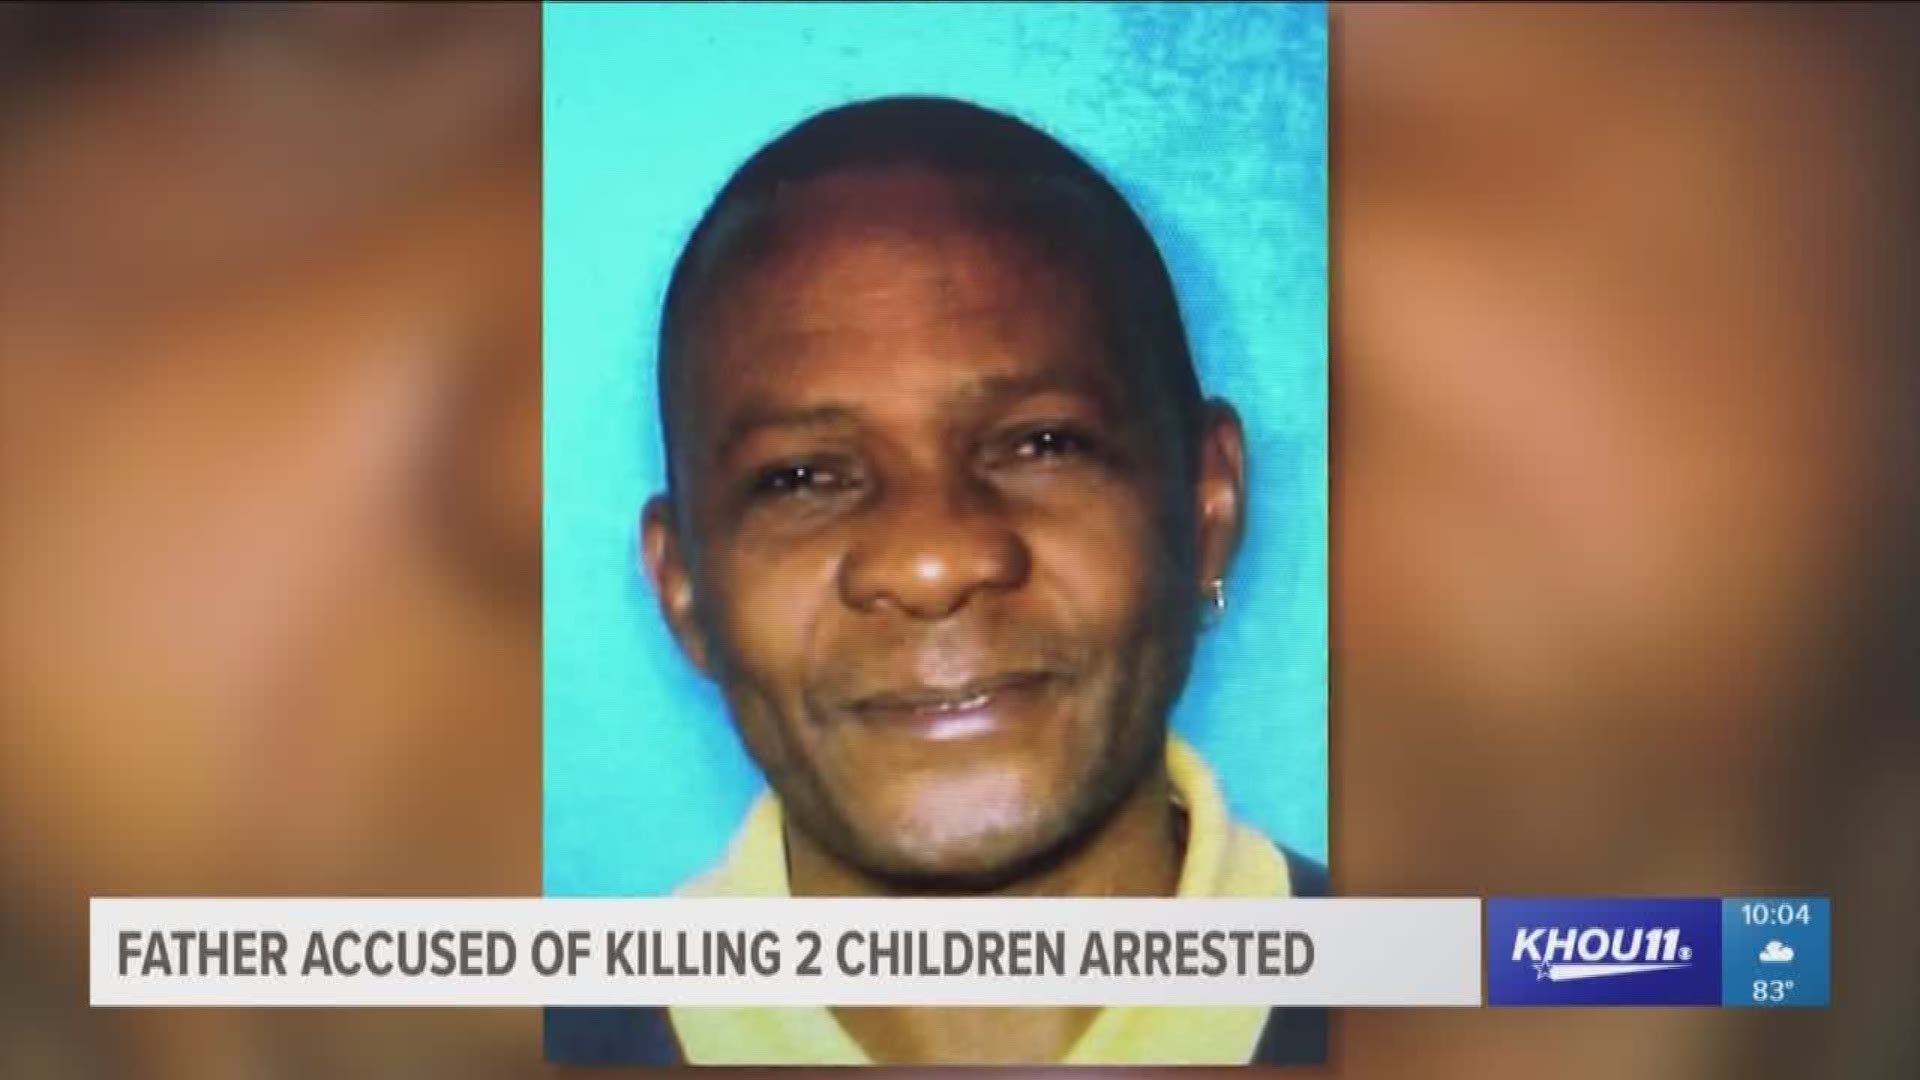 Police said they found the 62-year-old man who is accused of allegedly stabbing his 8-year-old son and 1-year-old daughter to death while their mother was working.